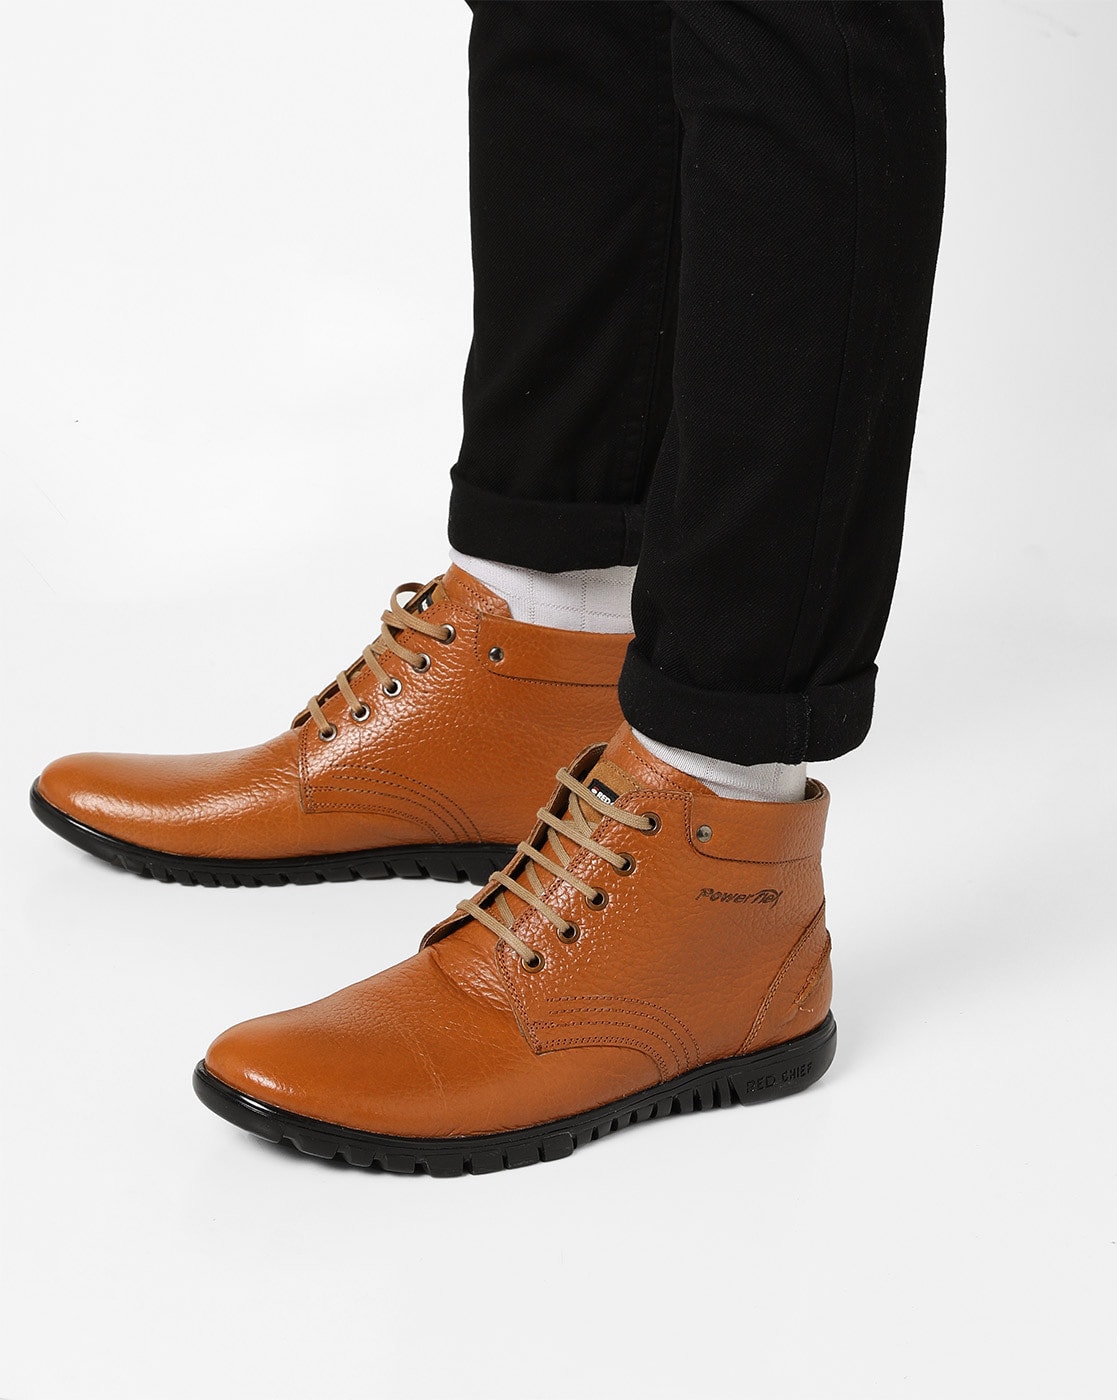 red chief casual leather shoes